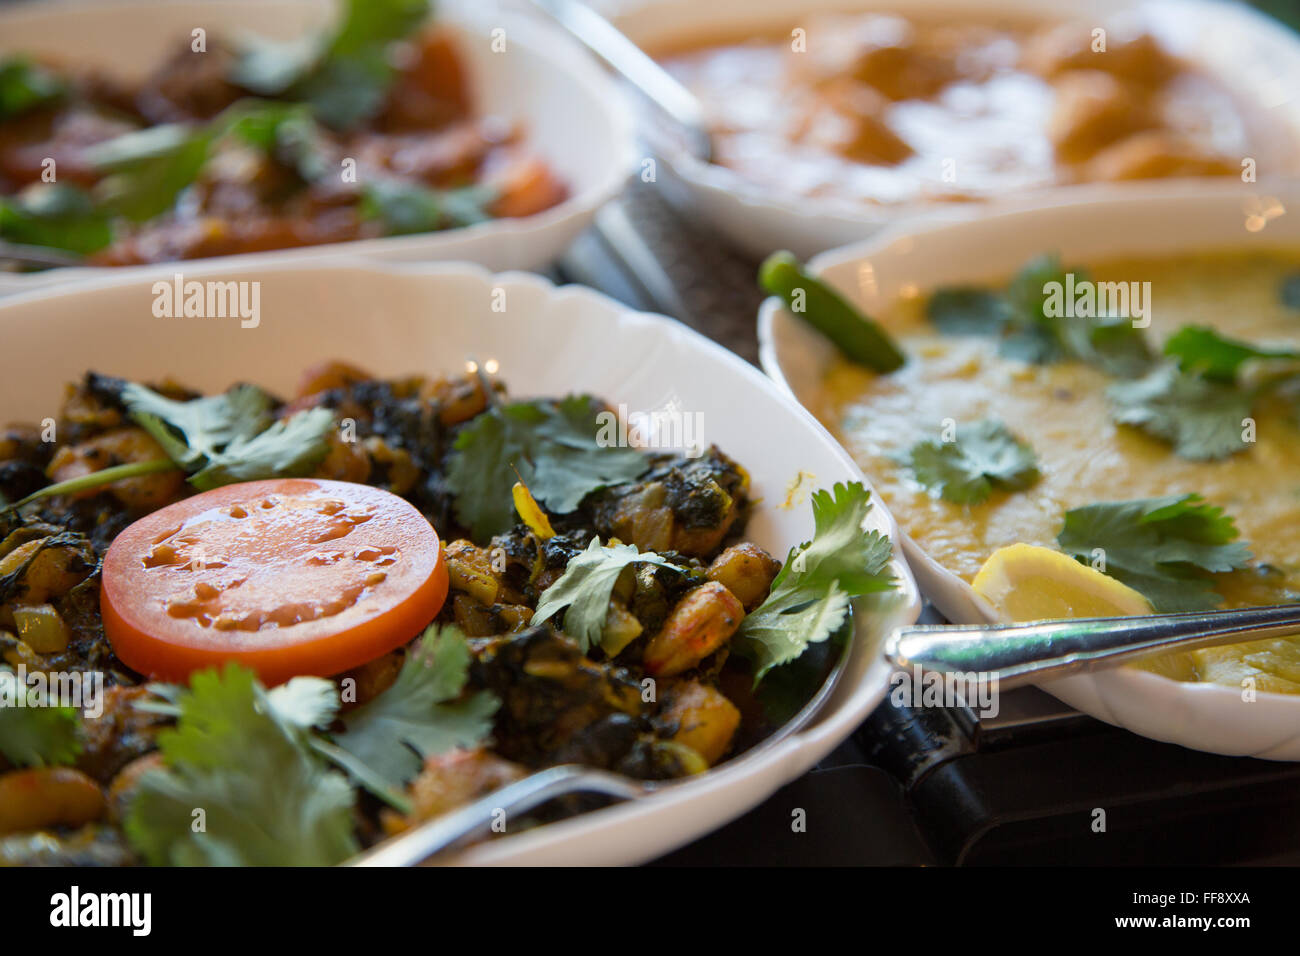 Indian curries in an English restaurant Stock Photo